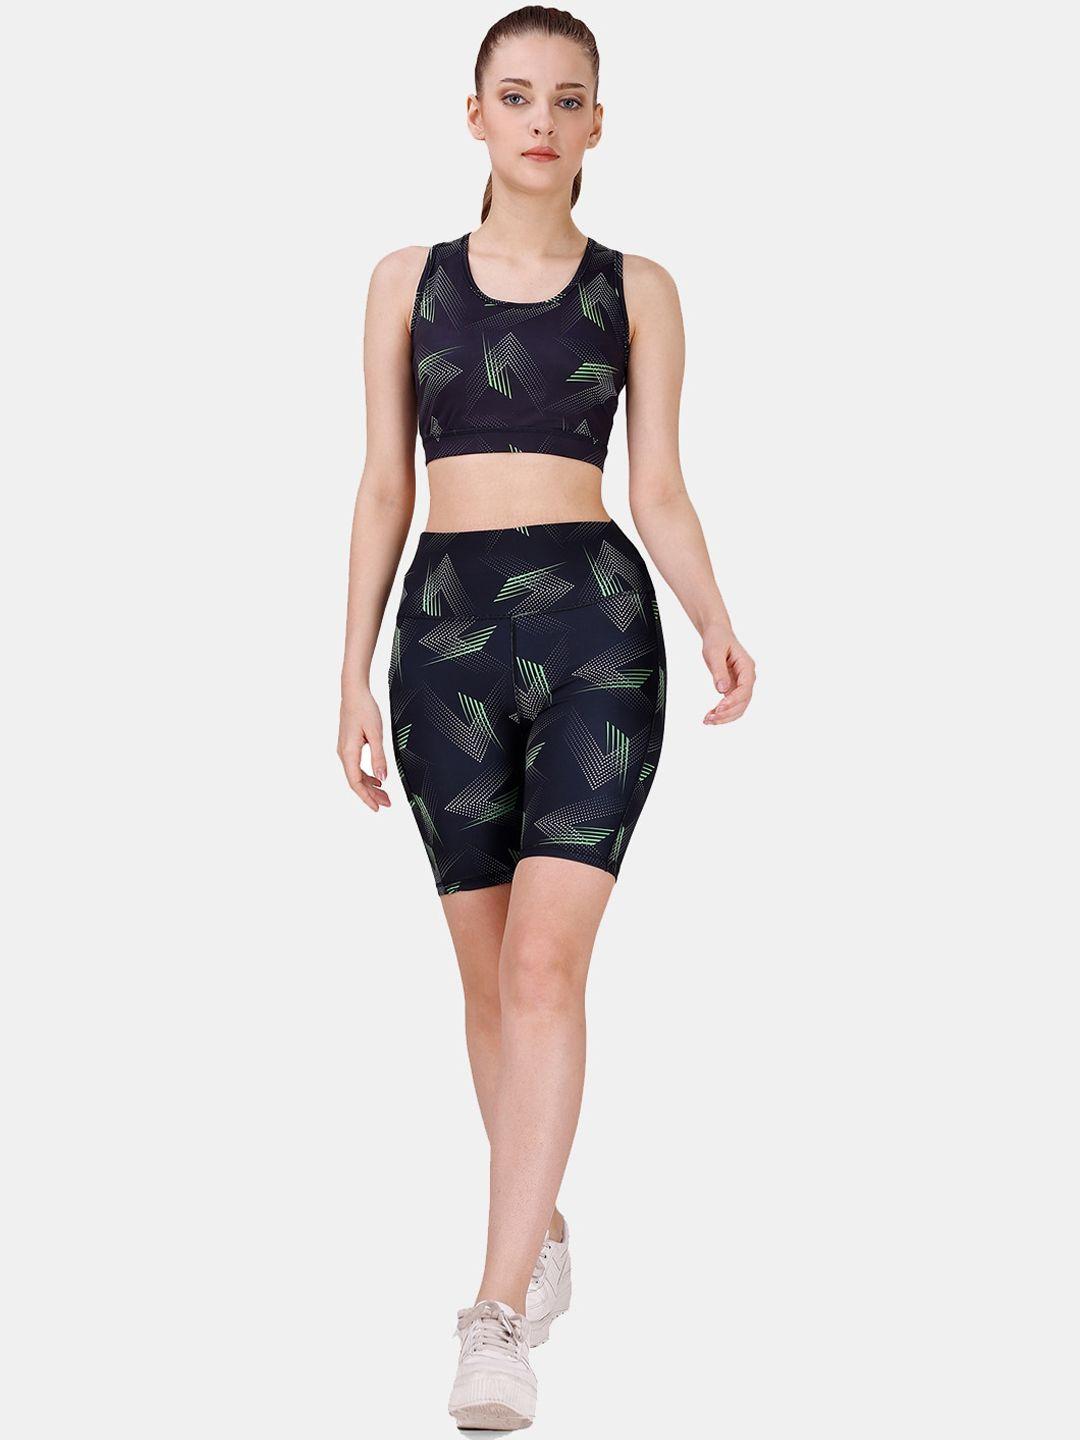 soie printed quick dry racerback sports co-ords set